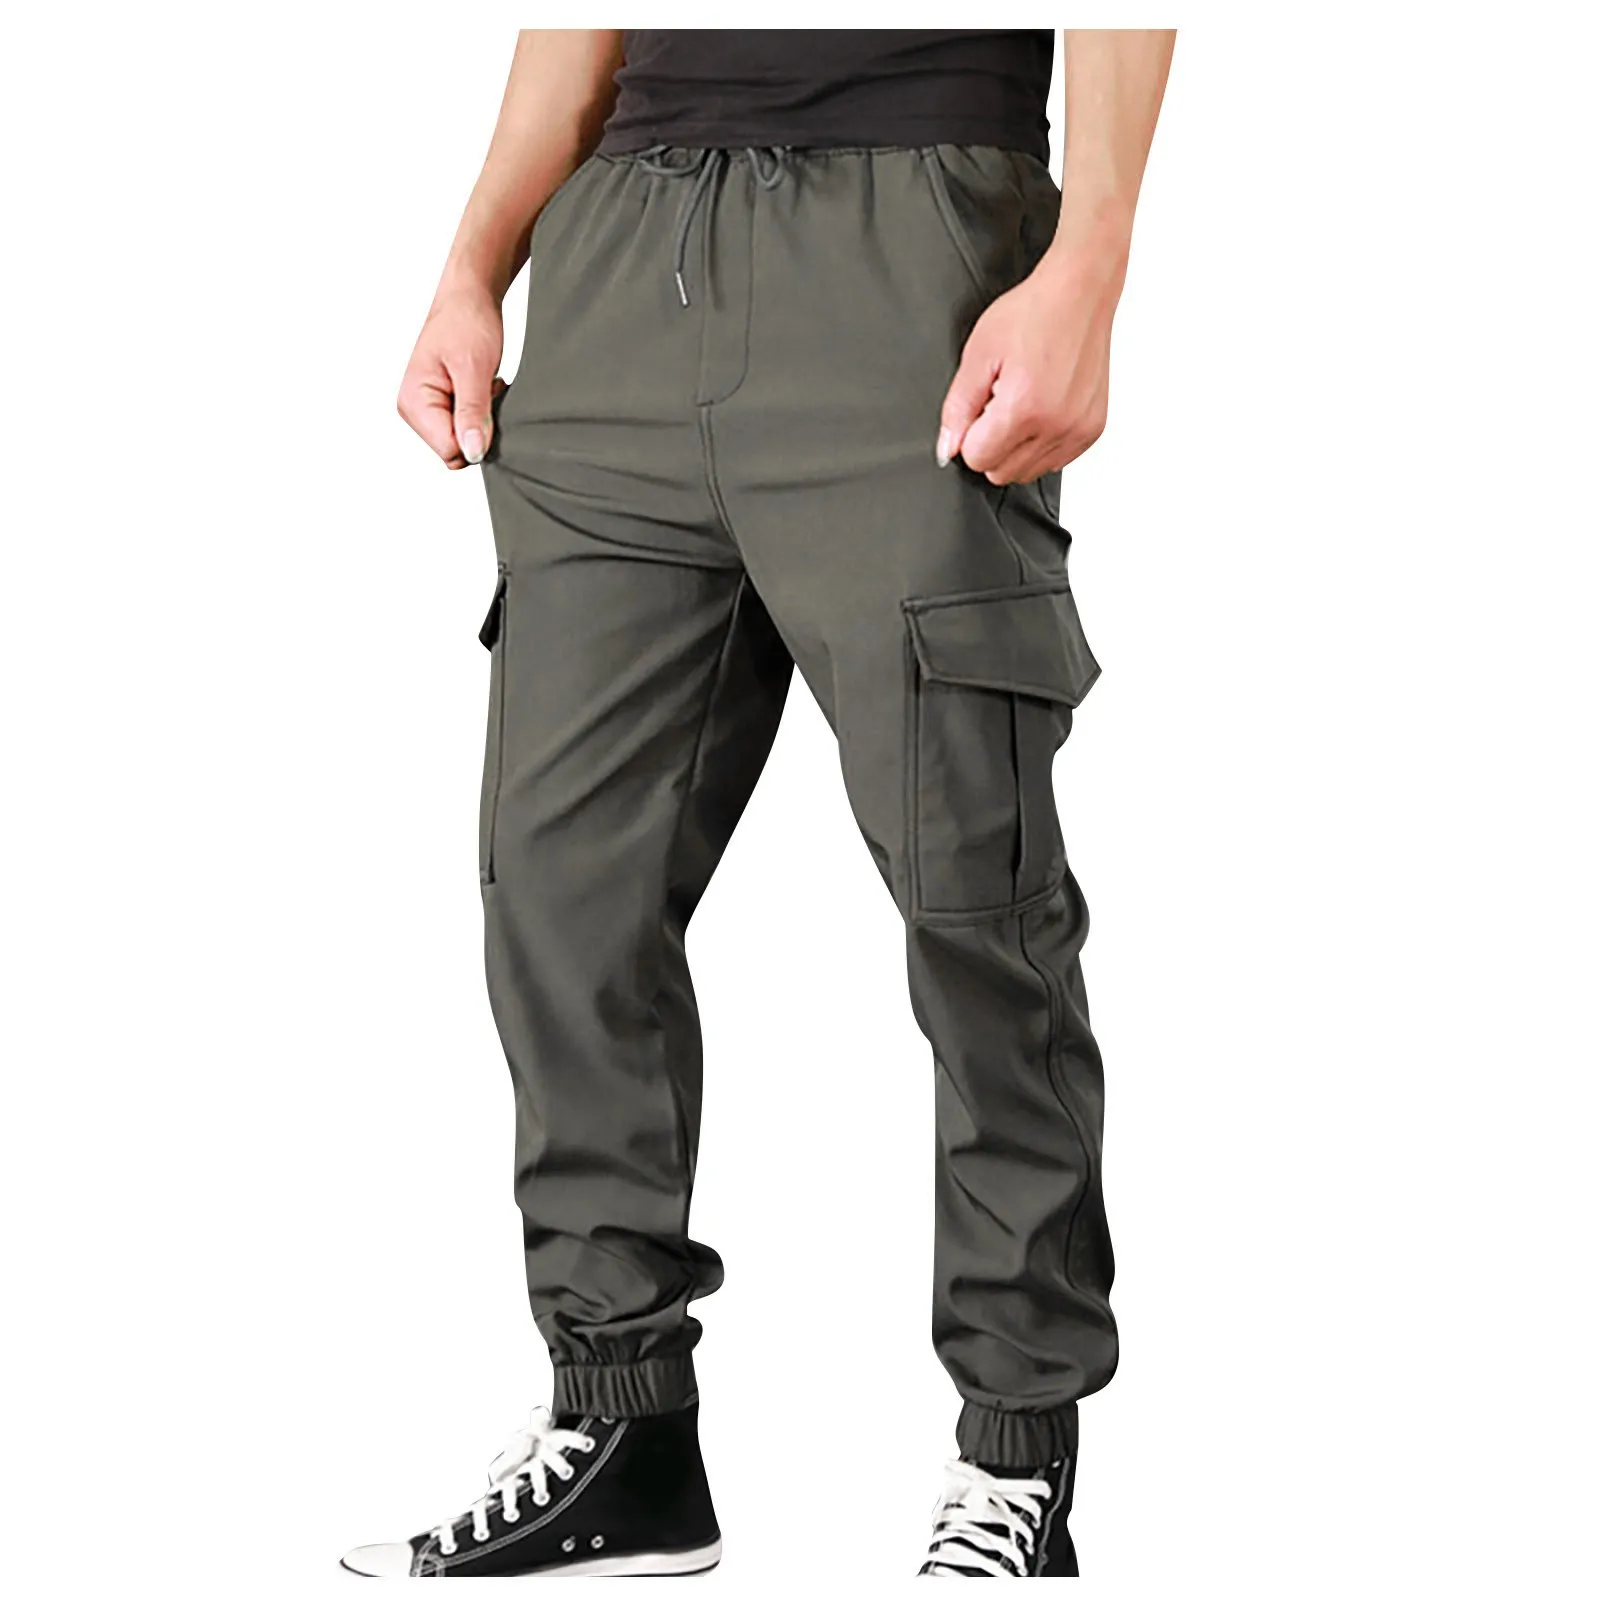 

Mid Waist Cargo Trousers For Men Fashion Trend Fitting Solid Color Overalls Pants With Pockets Outdoor Casual Street Style Pants